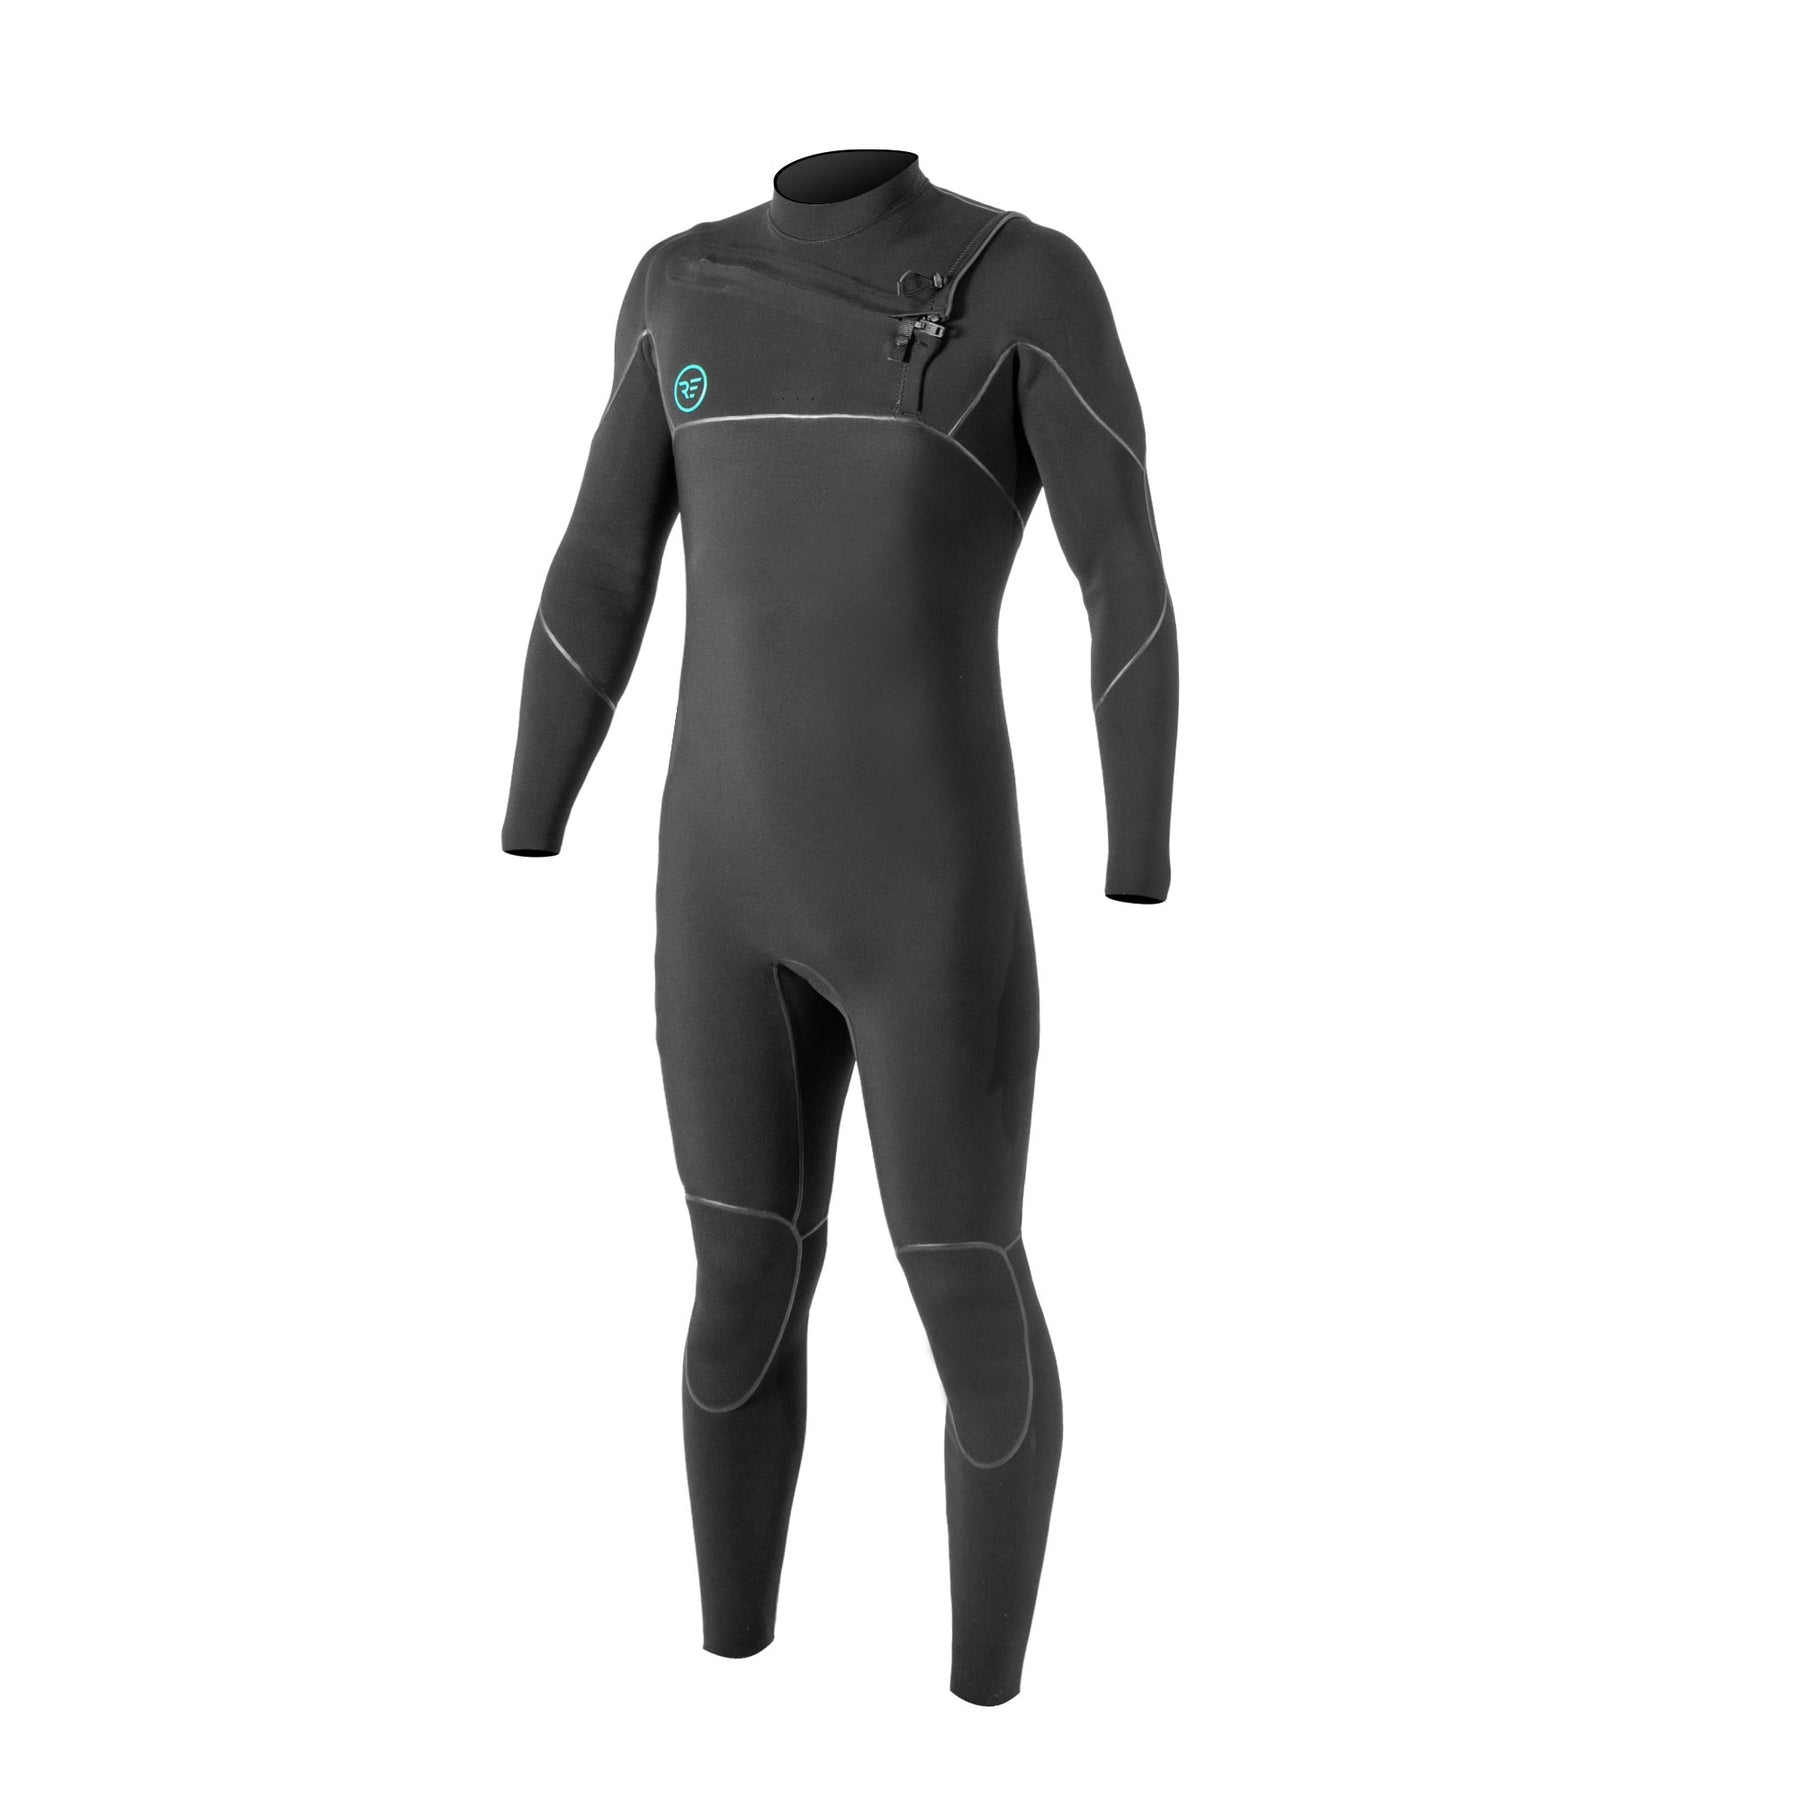 Ride Engine Apoc 5/4/3 FZ Wetsuit – LT – The Foiling Collective